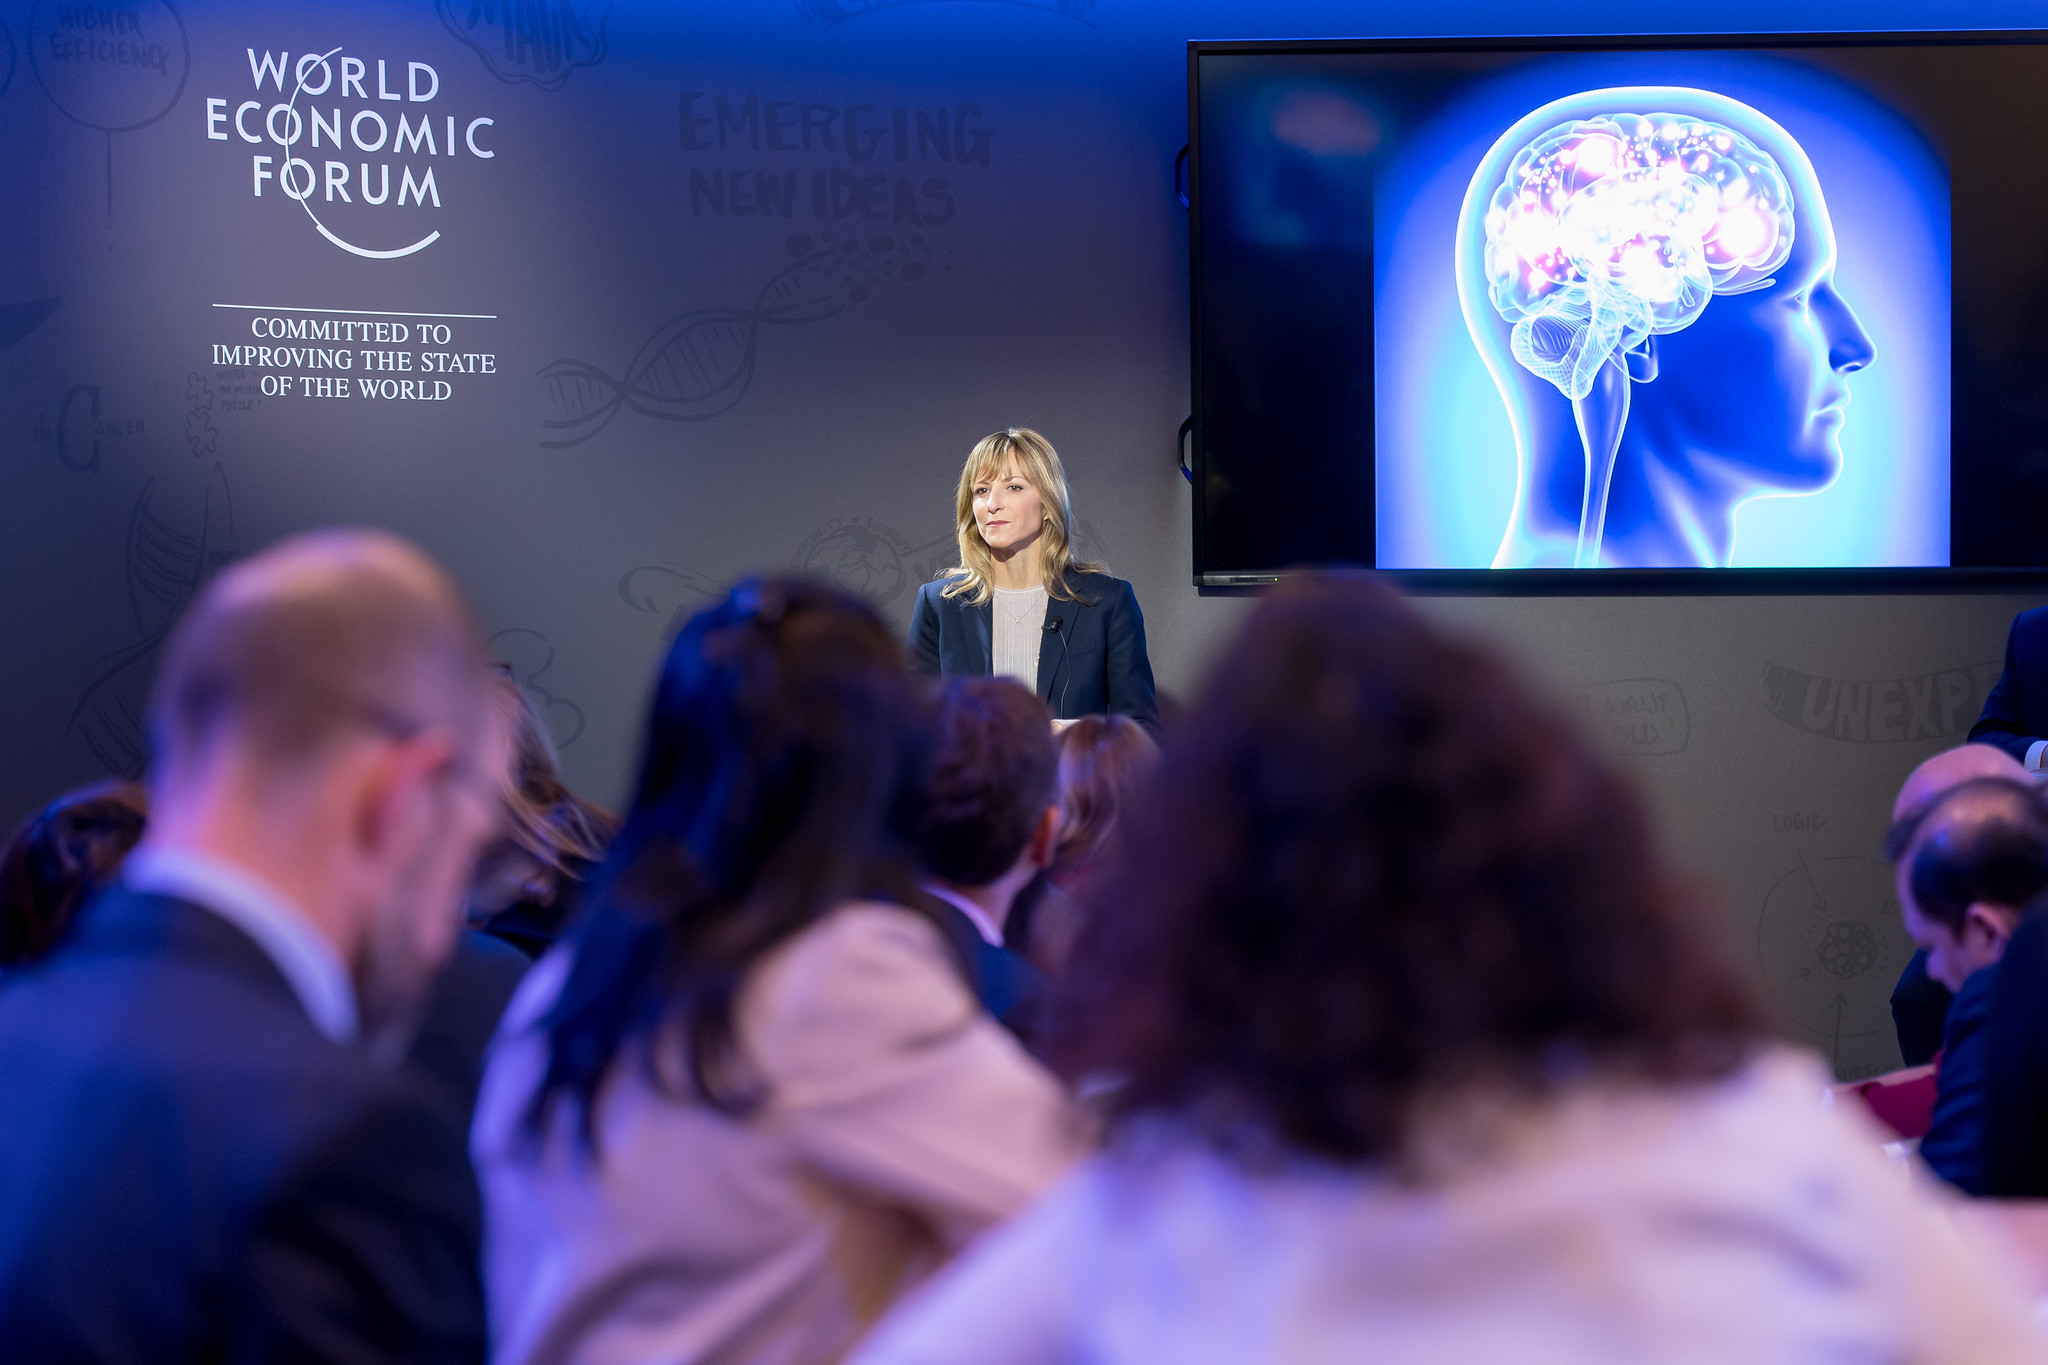 Beth Darnall peaking during the Session "Hypnosis, Pain and the Power of the Mind with Stanford University" at the Annual Meeting 2018 of the World Economic Forum in Davos, January 23, 2018